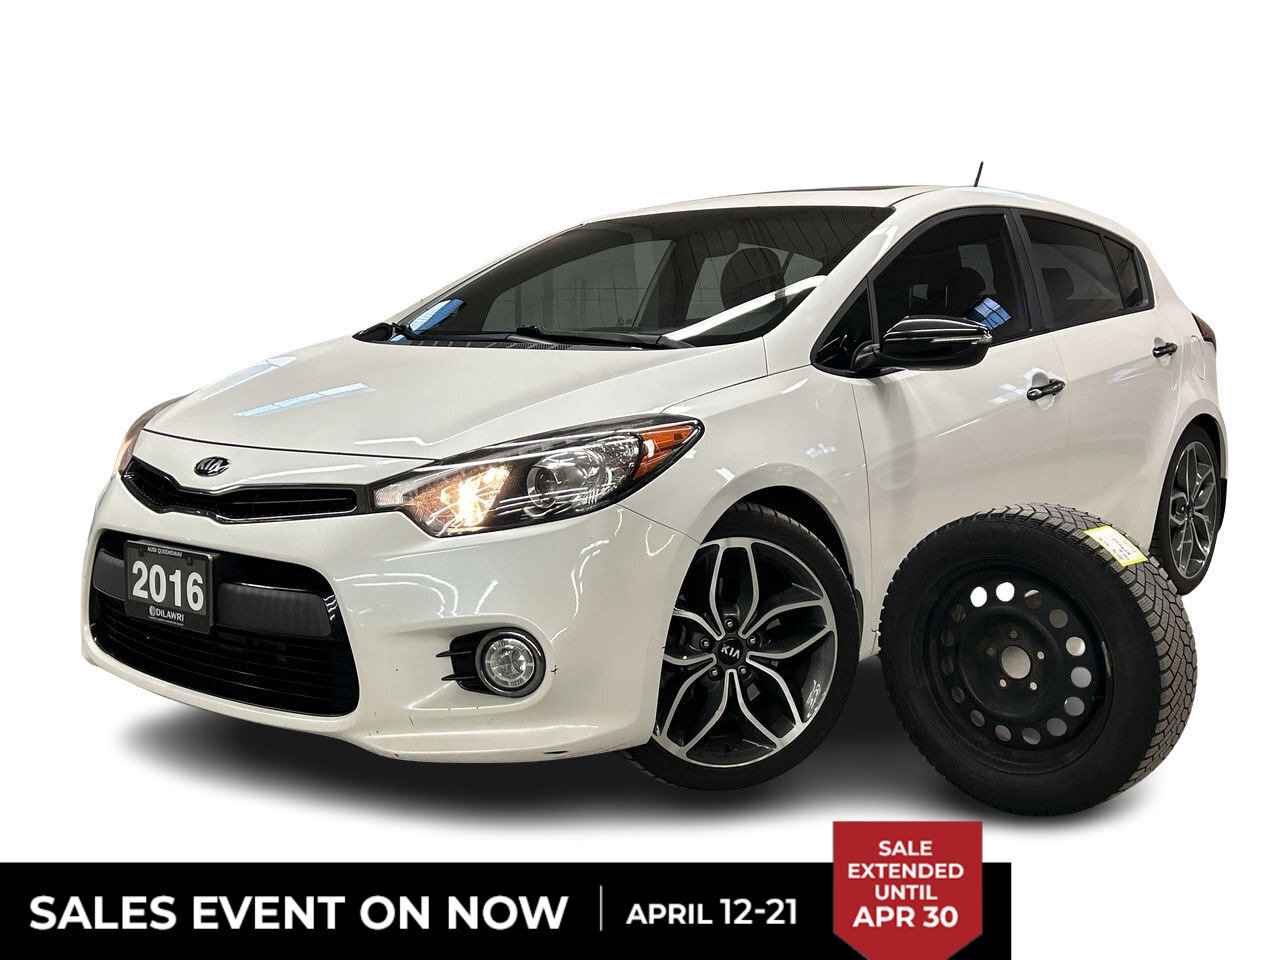 2016 Kia Forte (5) SX Luxury | 1st Payment on Us April 12th - 30t